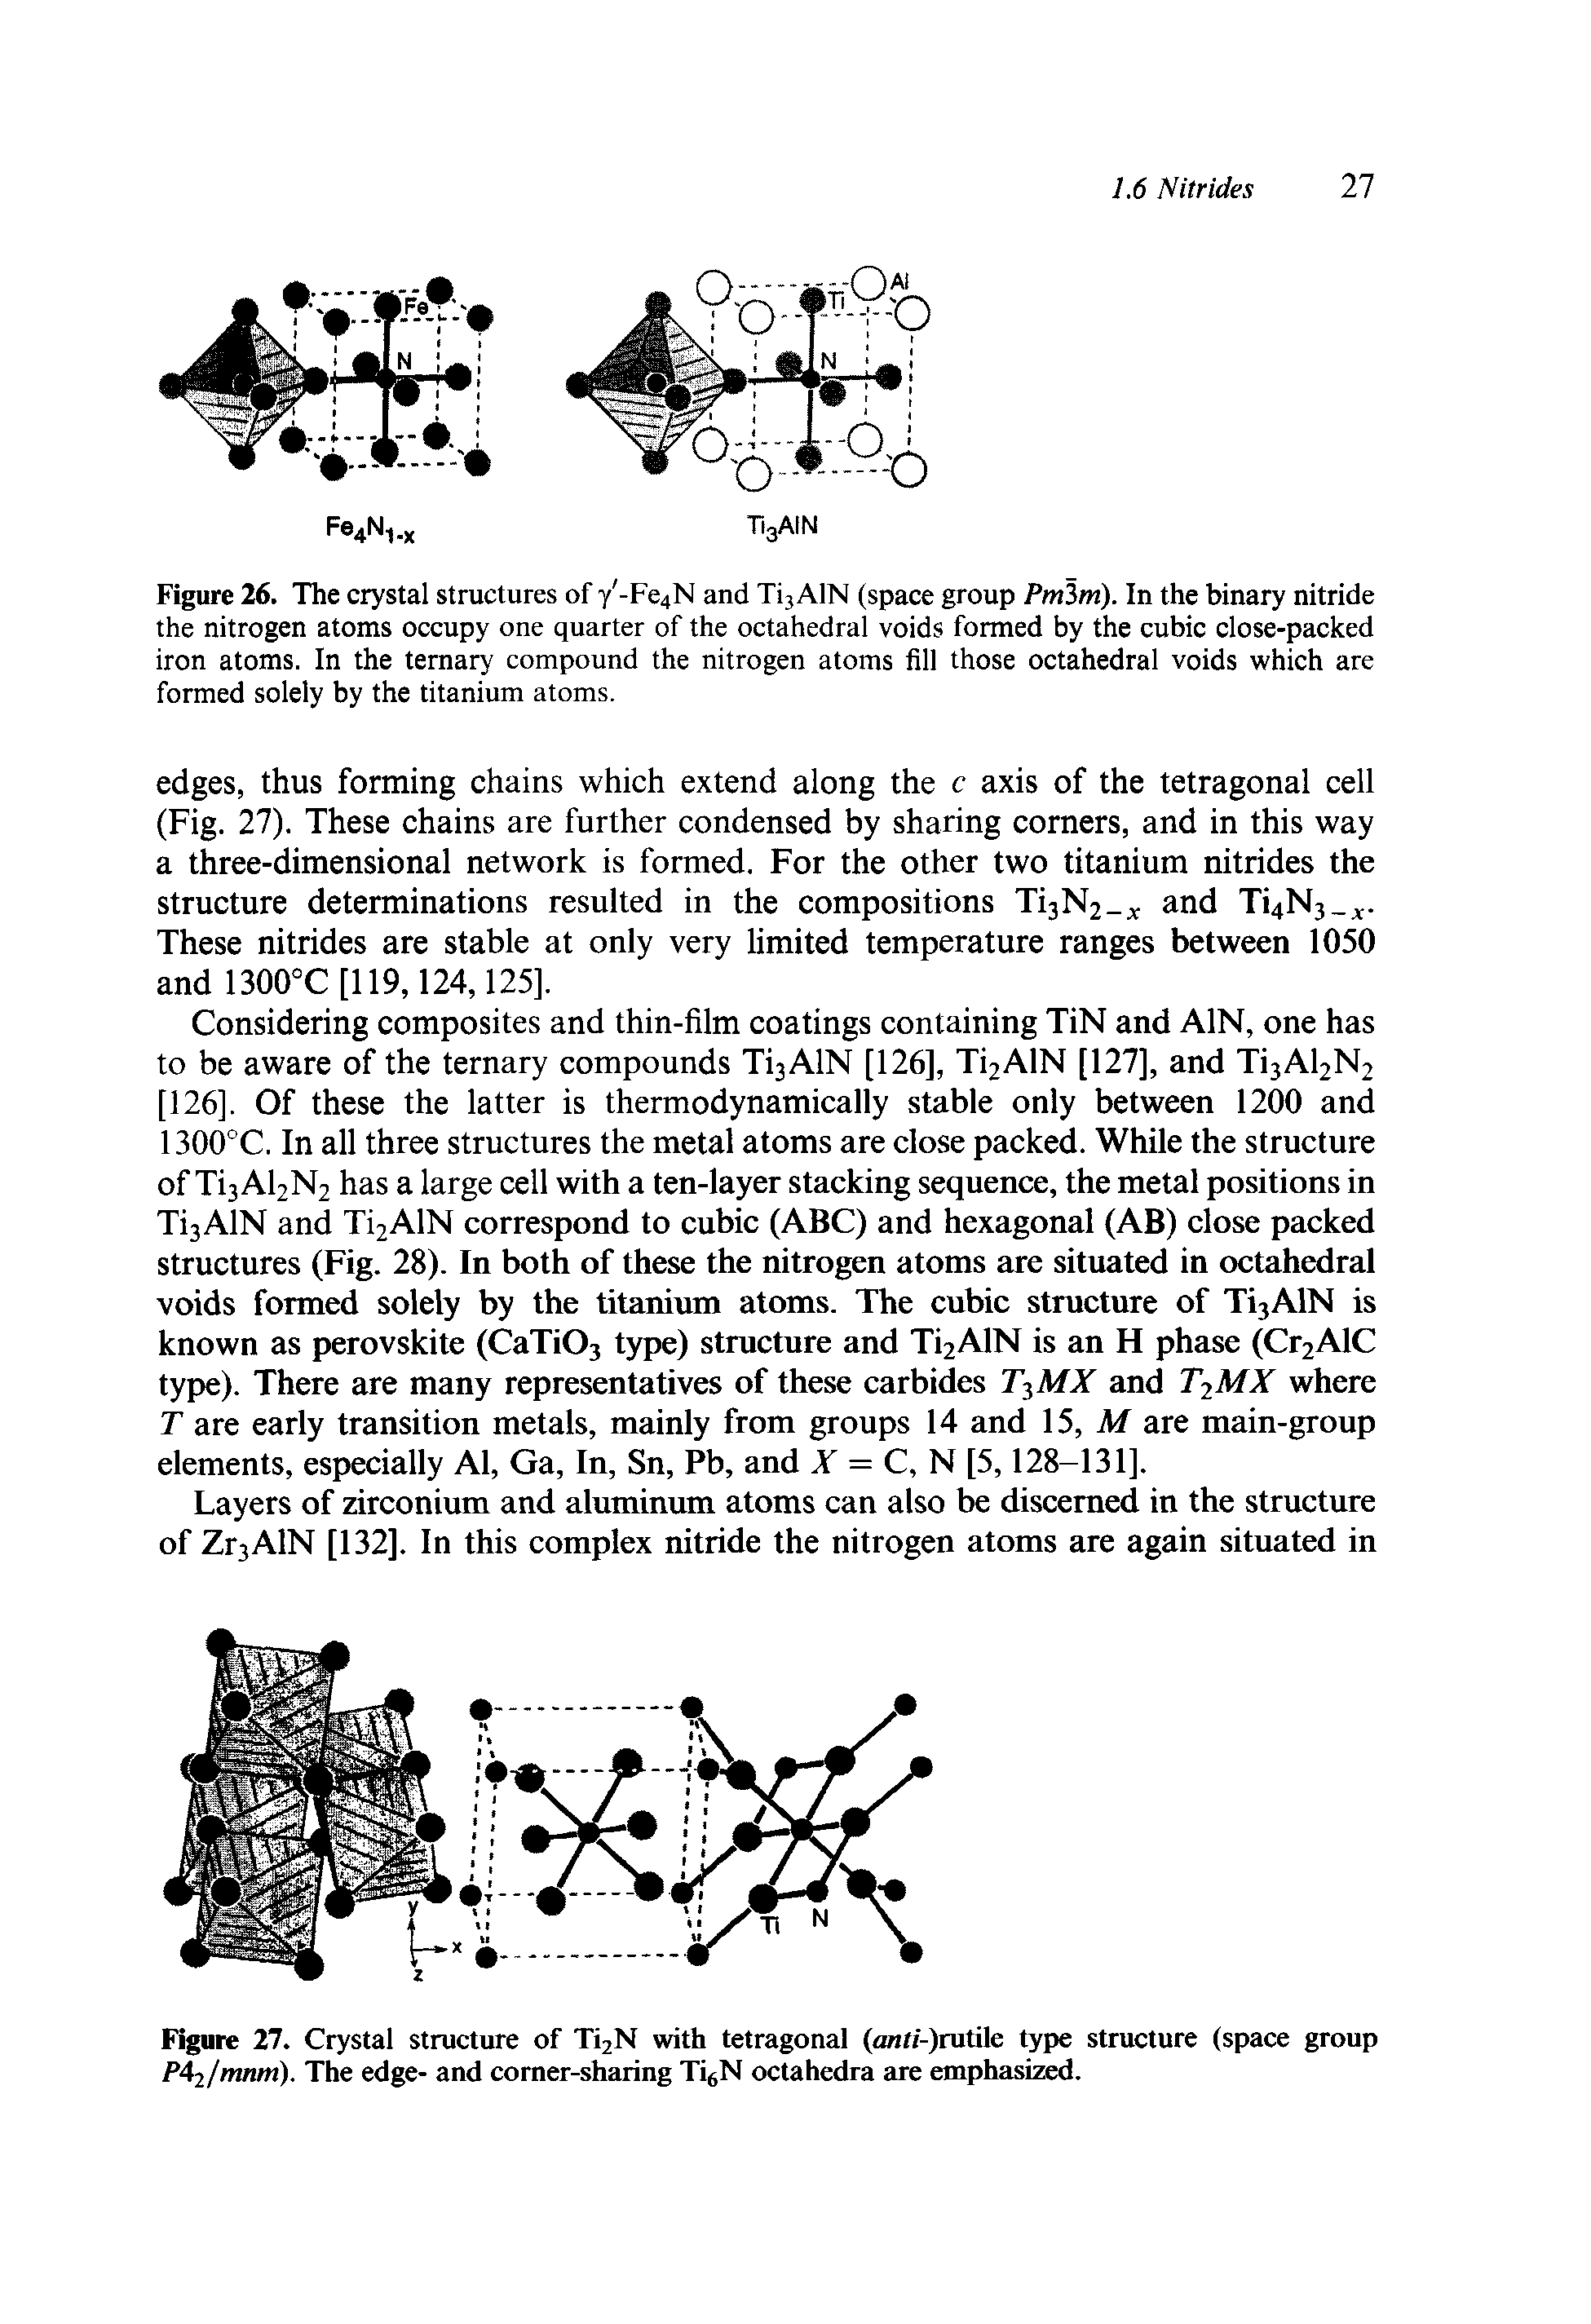 Figure 26. The crystal structures of y -Fc4N and Ti3AlN (space group Pm3m). In the binary nitride the nitrogen atoms occupy one quarter of the octahedral voids formed by the cubic close-packed iron atoms. In the ternary compound the nitrogen atoms fill those octahedral voids which are formed solely by the titanium atoms.